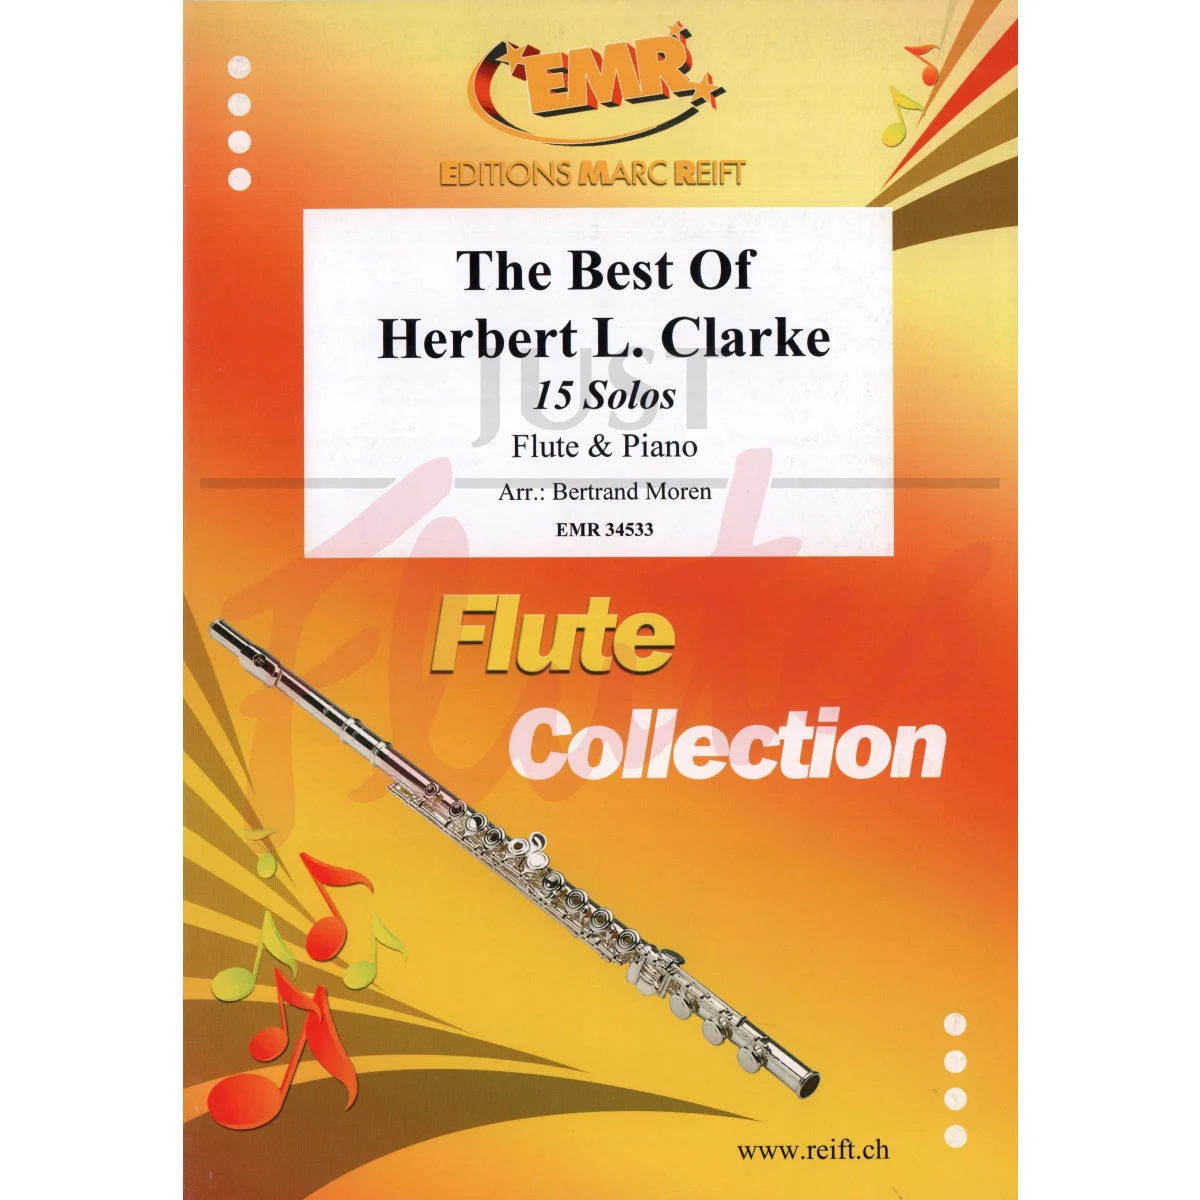 The Best of Herbert L. Clarke - 15 Solos for Flute and Piano